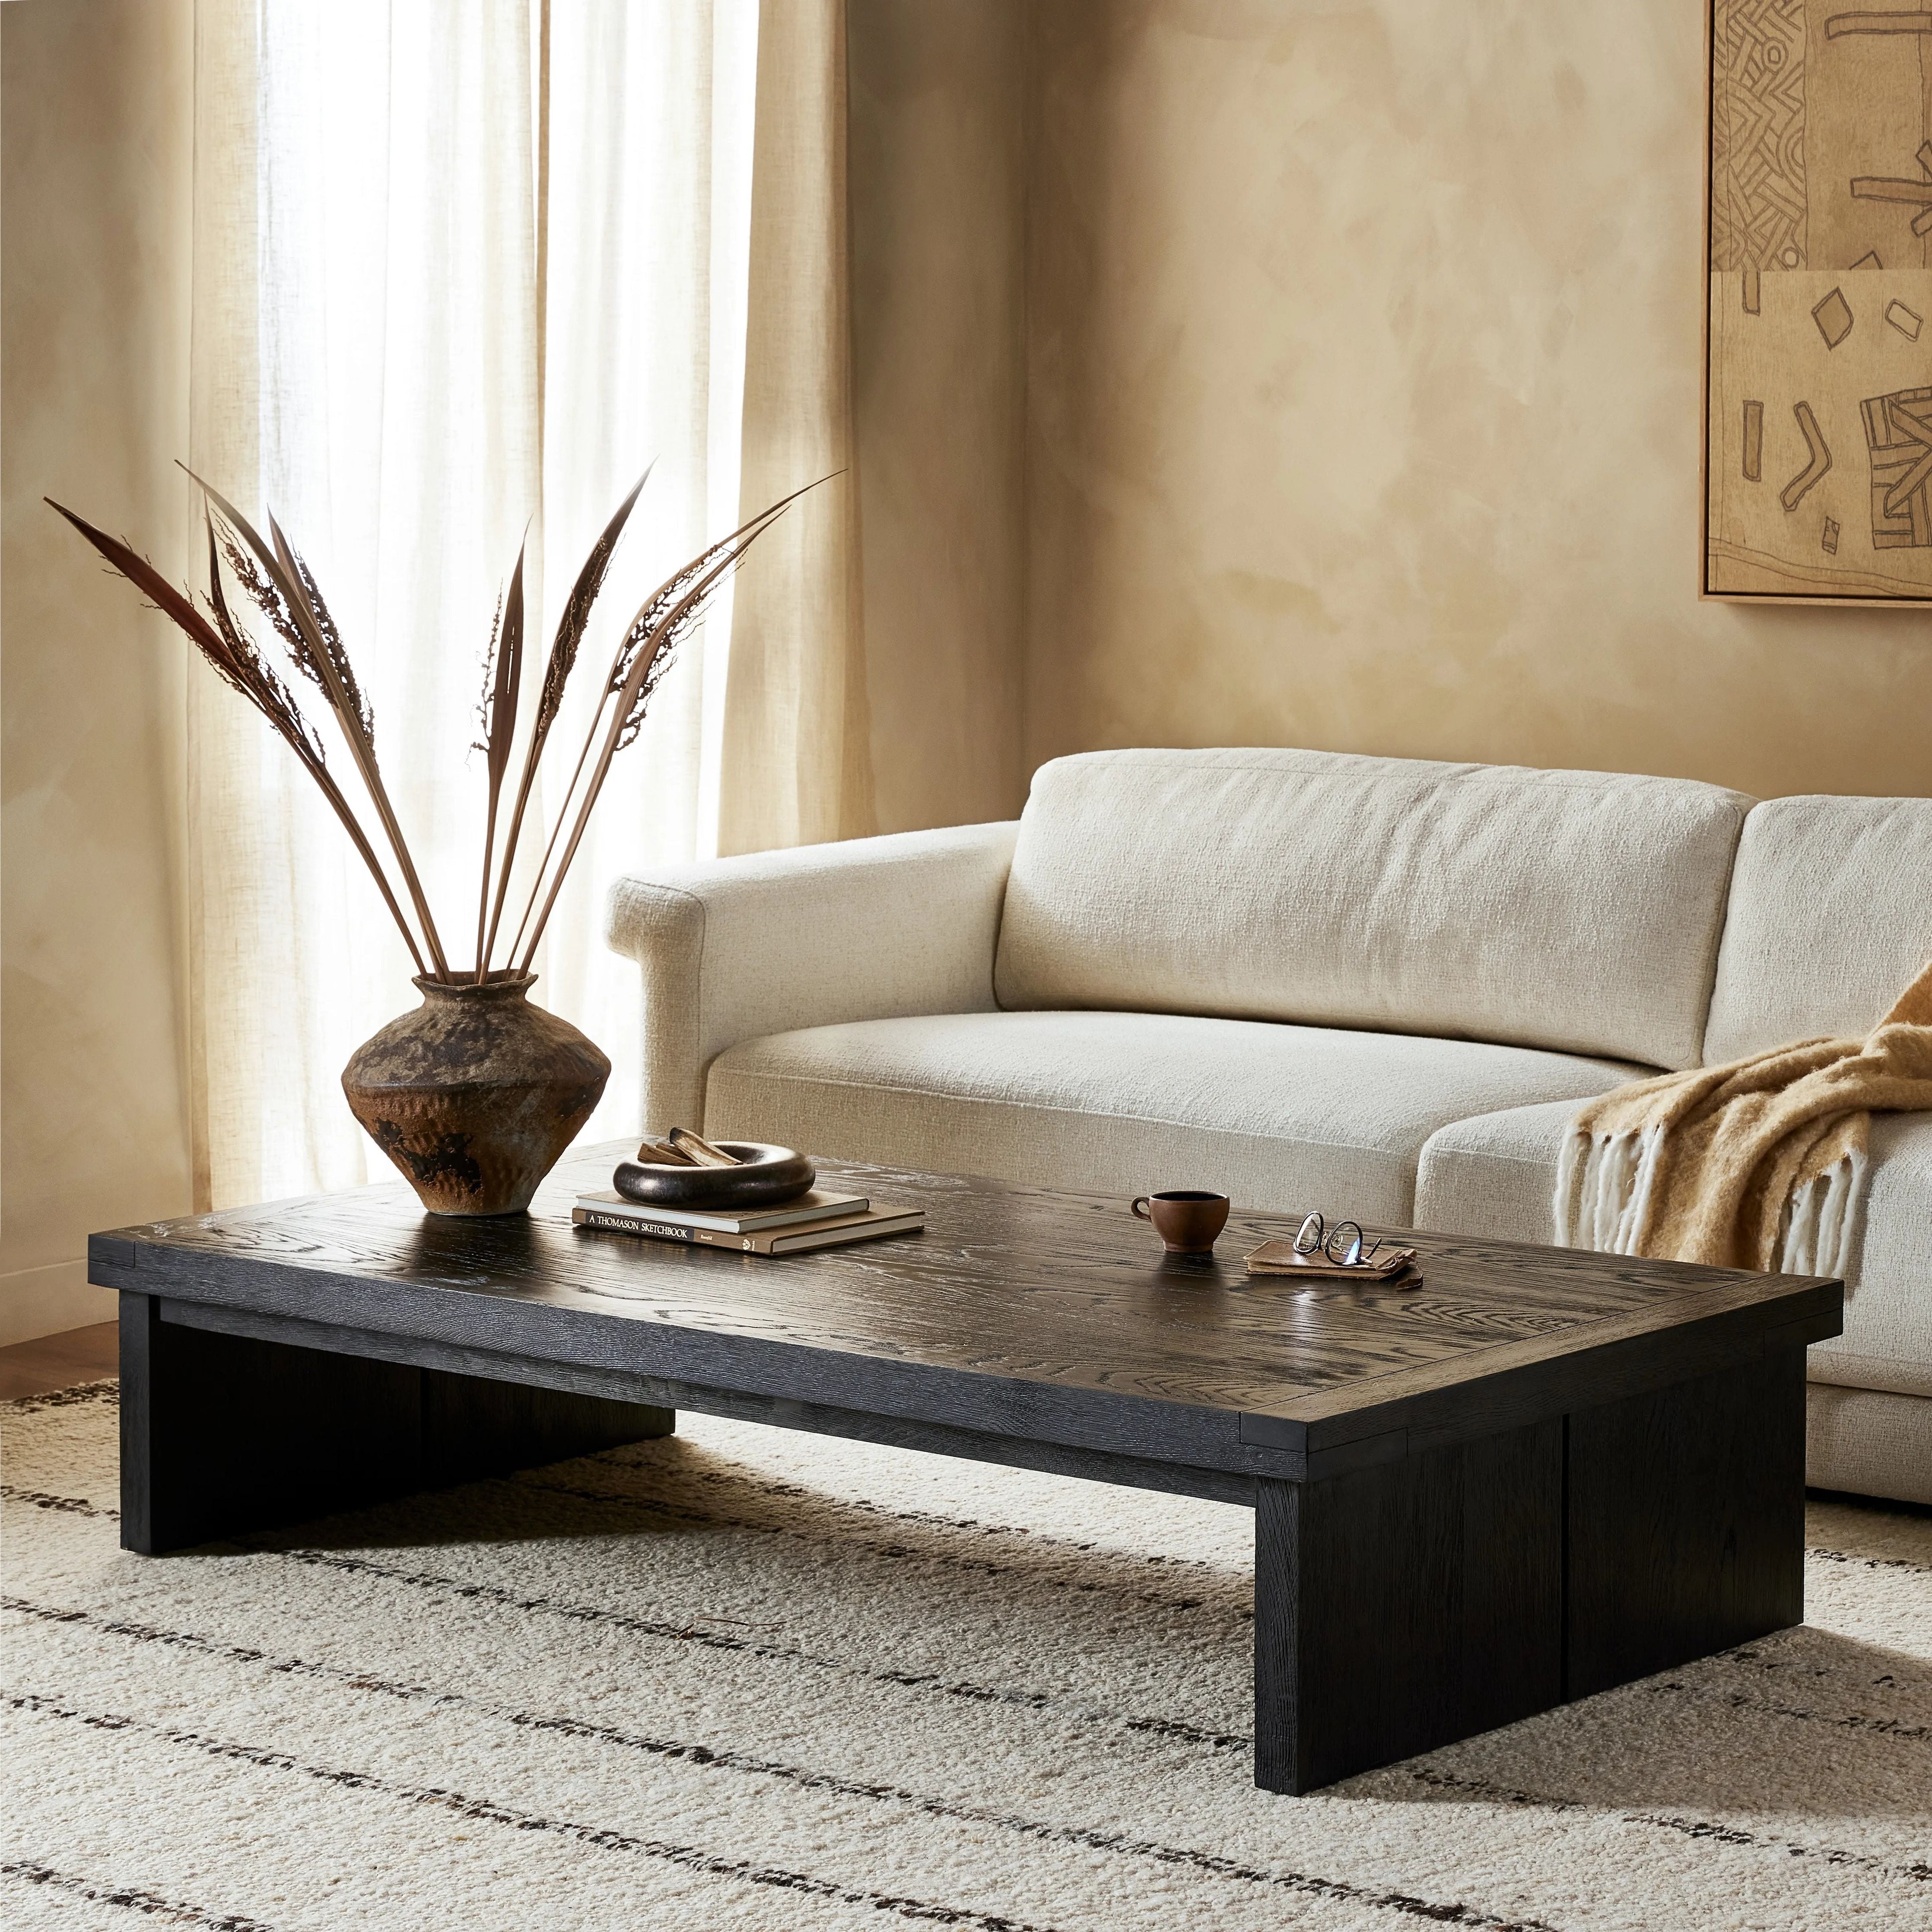 Black-finished oak shapes a streamlined coffee table with a rich while minimalist look.Collection: Bennet Amethyst Home provides interior design, new home construction design consulting, vintage area rugs, and lighting in the Seattle metro area.